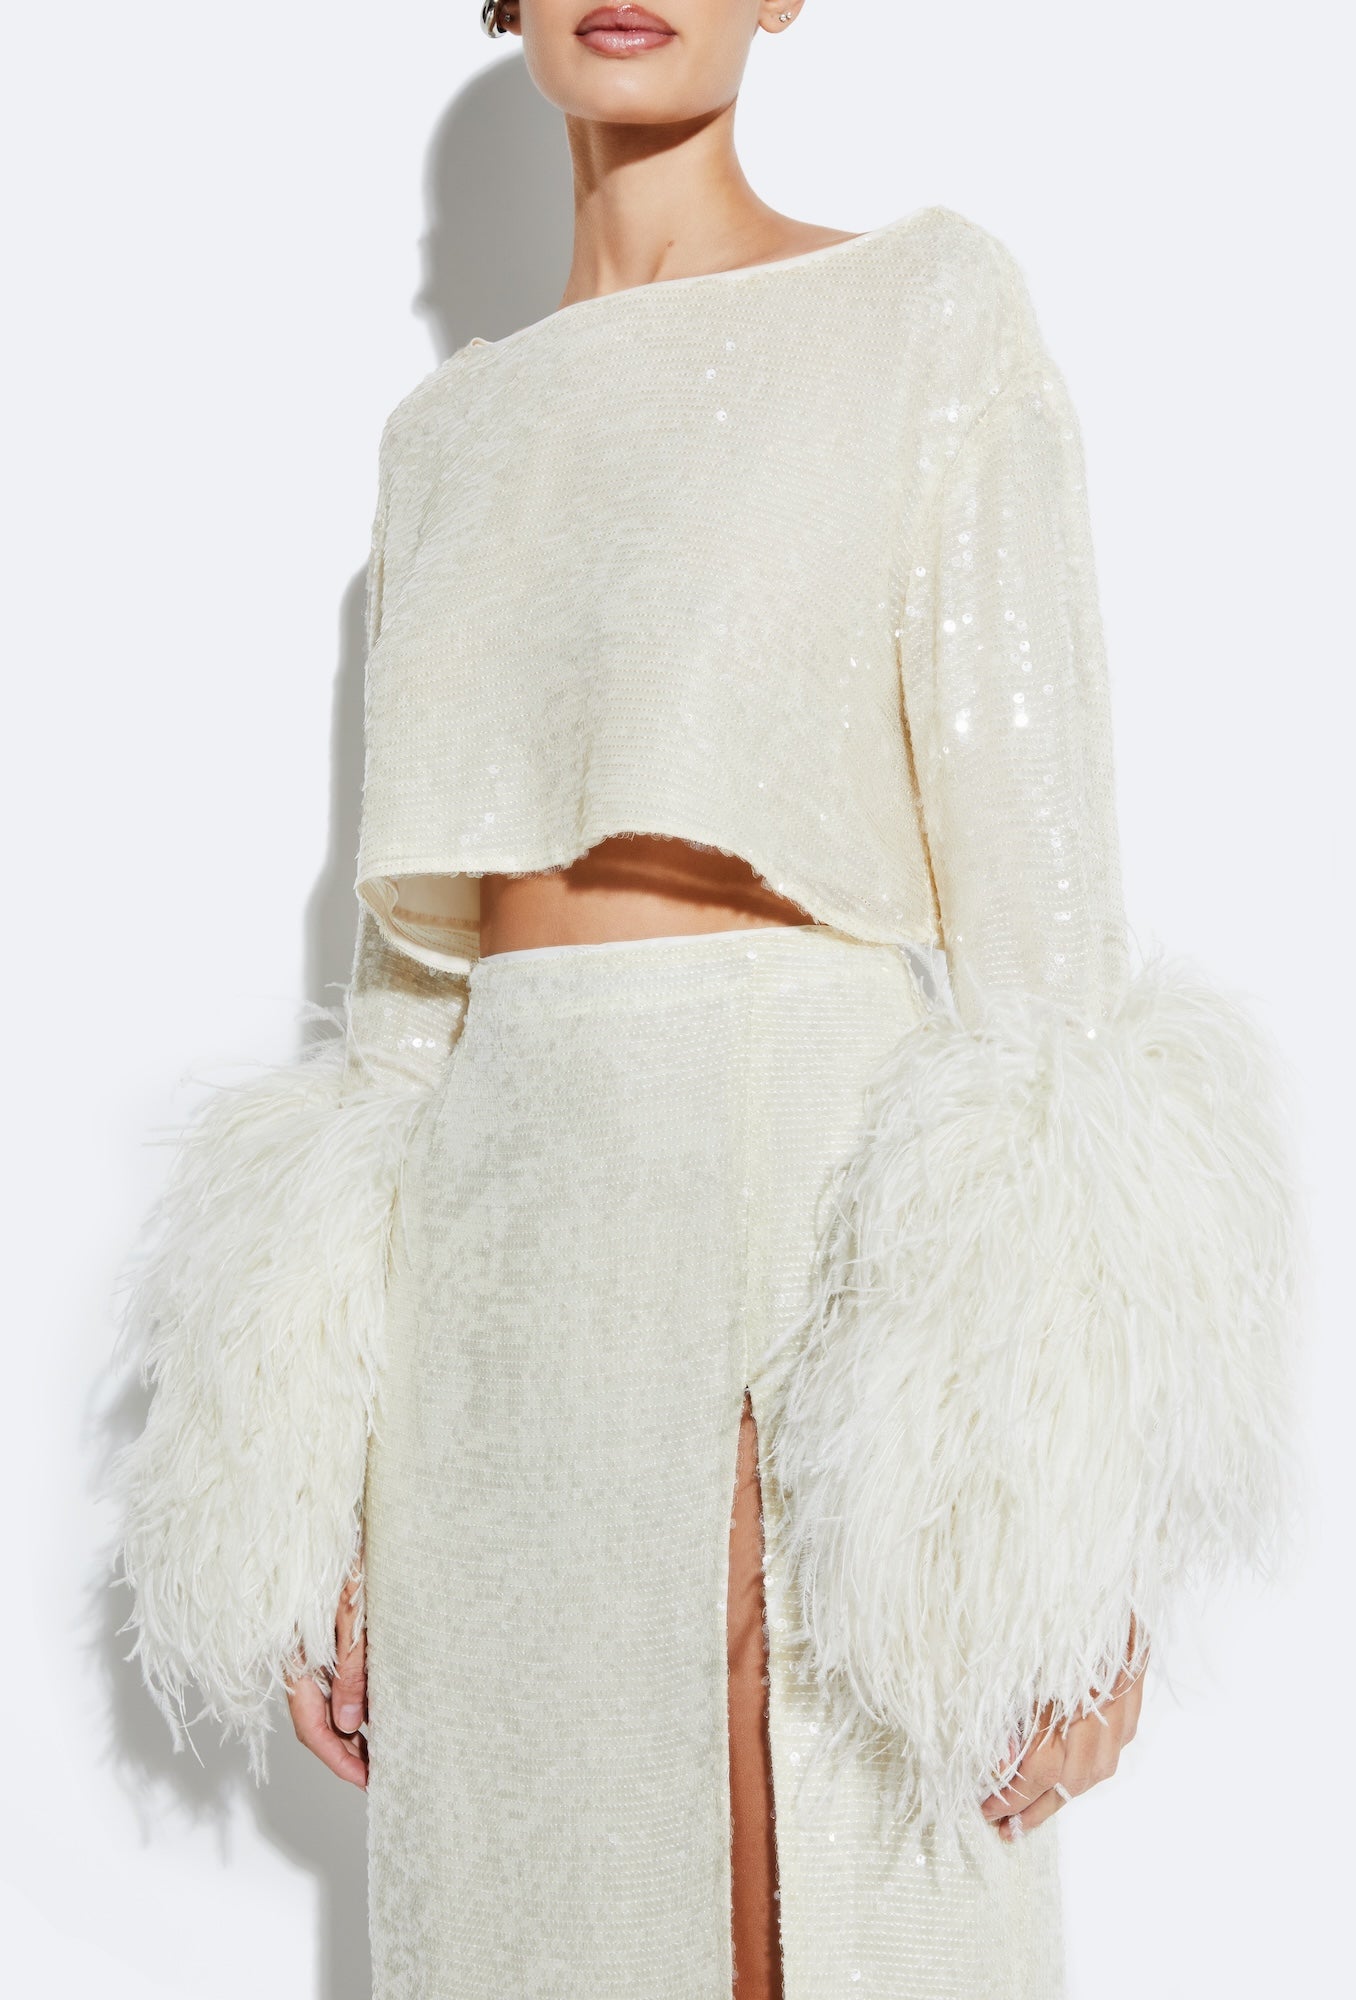 Sequin Cropped Top With Feathers - LAPOINTE